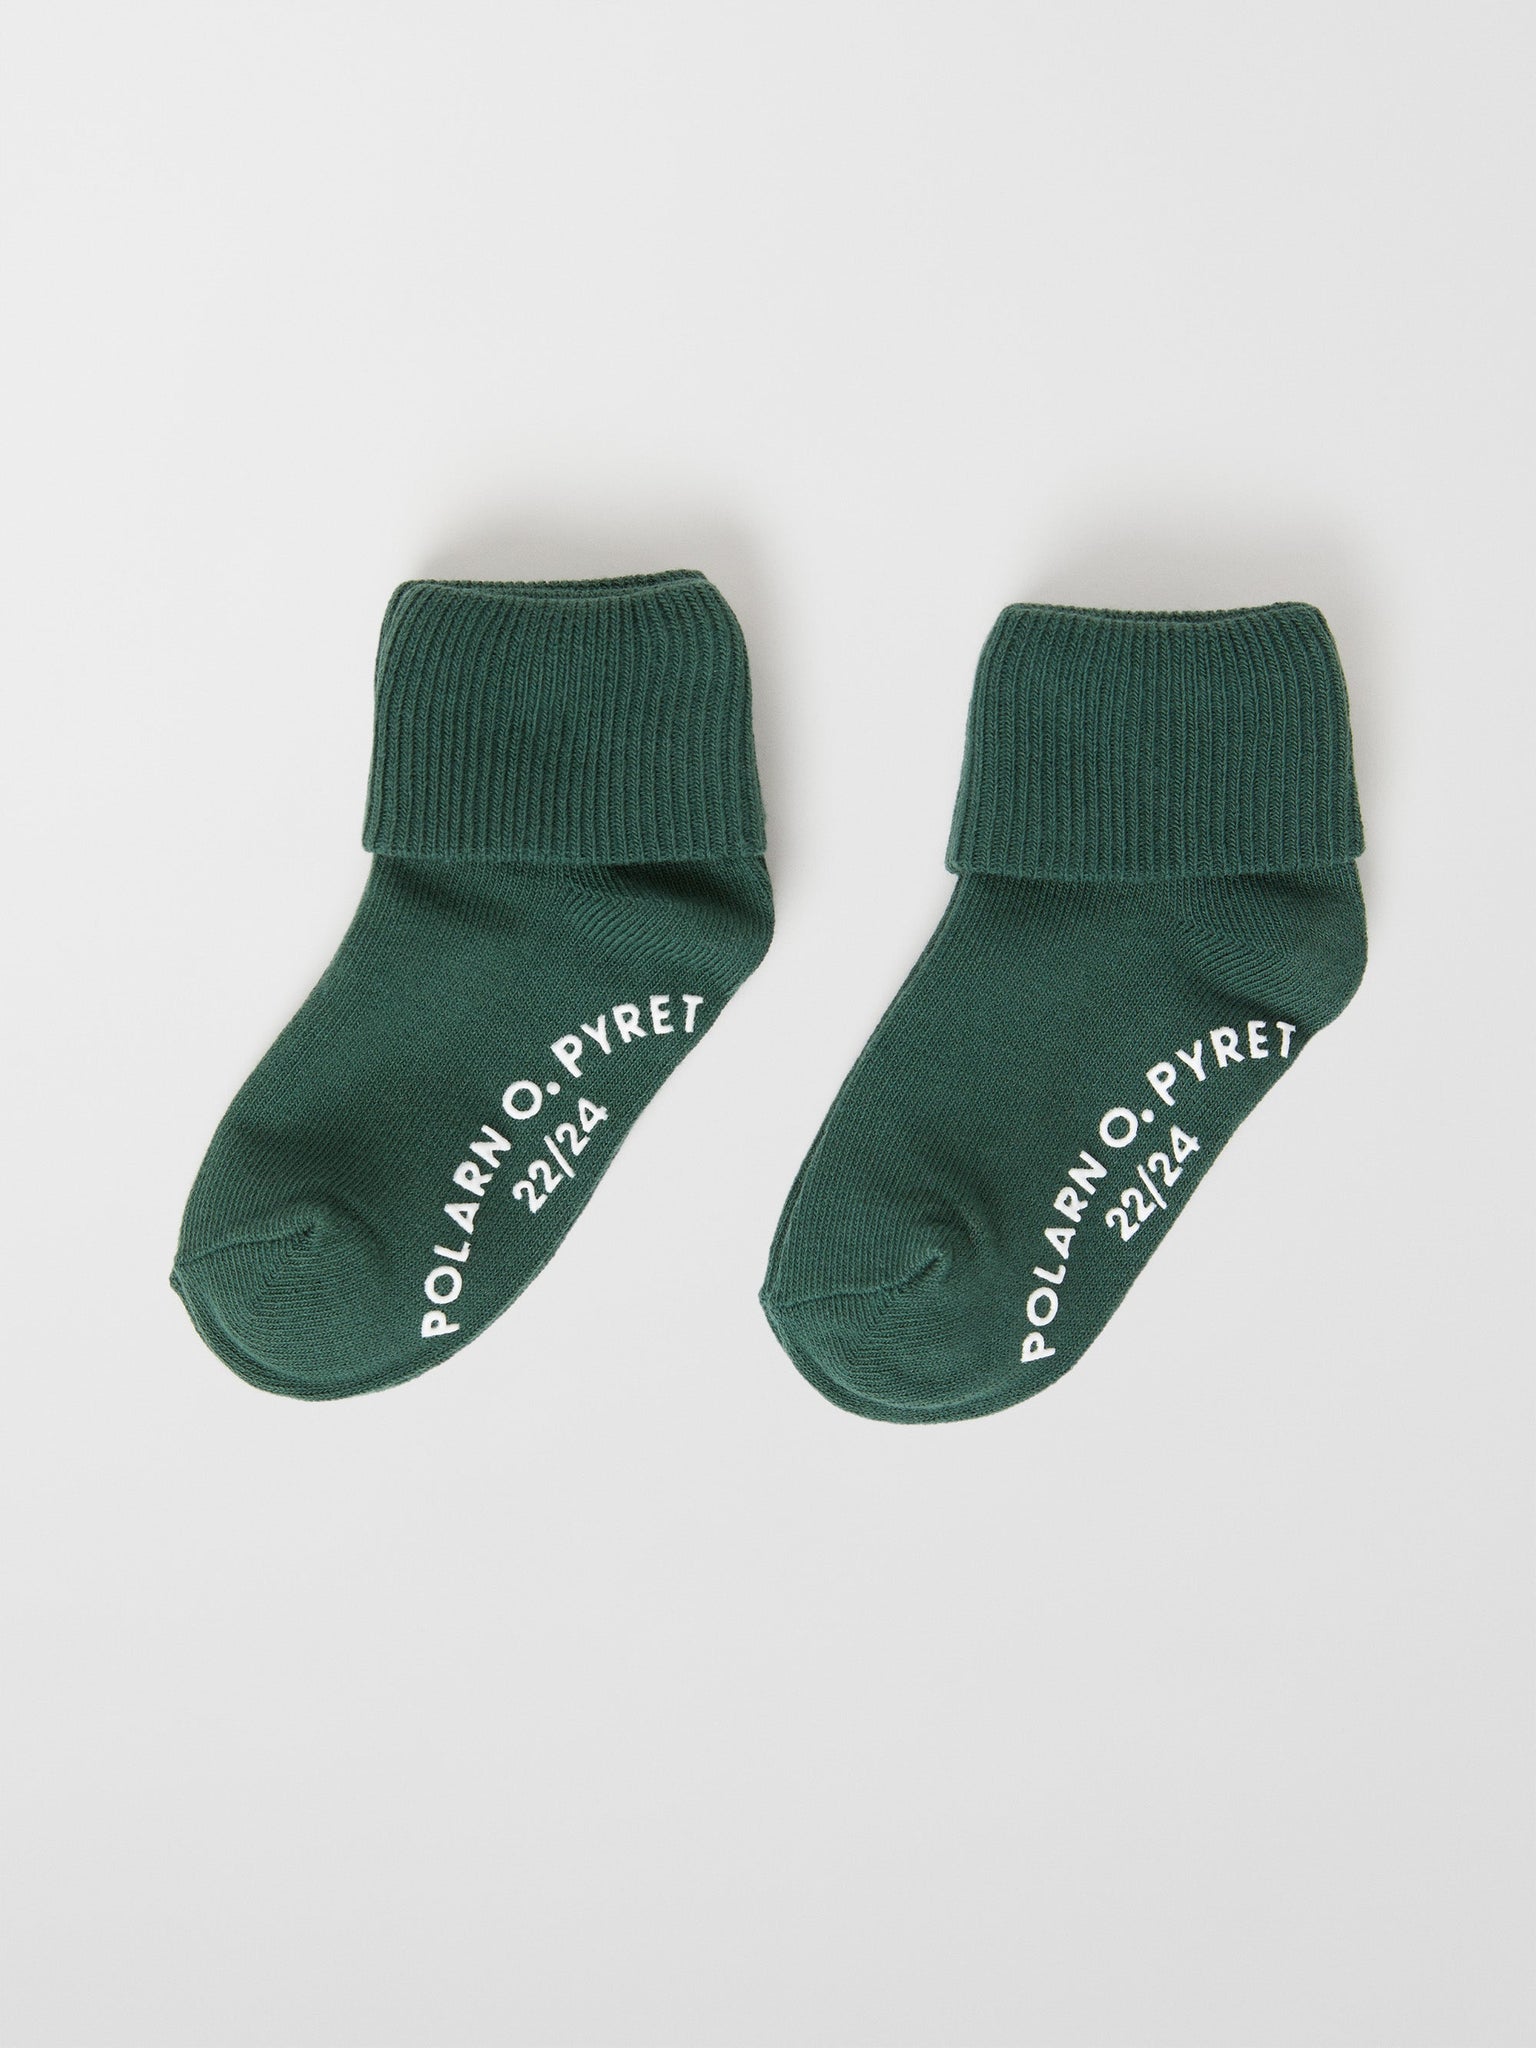 Cotton Antislip Kids Socks Multipack from the Polarn O. Pyret kids collection. Clothes made using sustainably sourced materials.